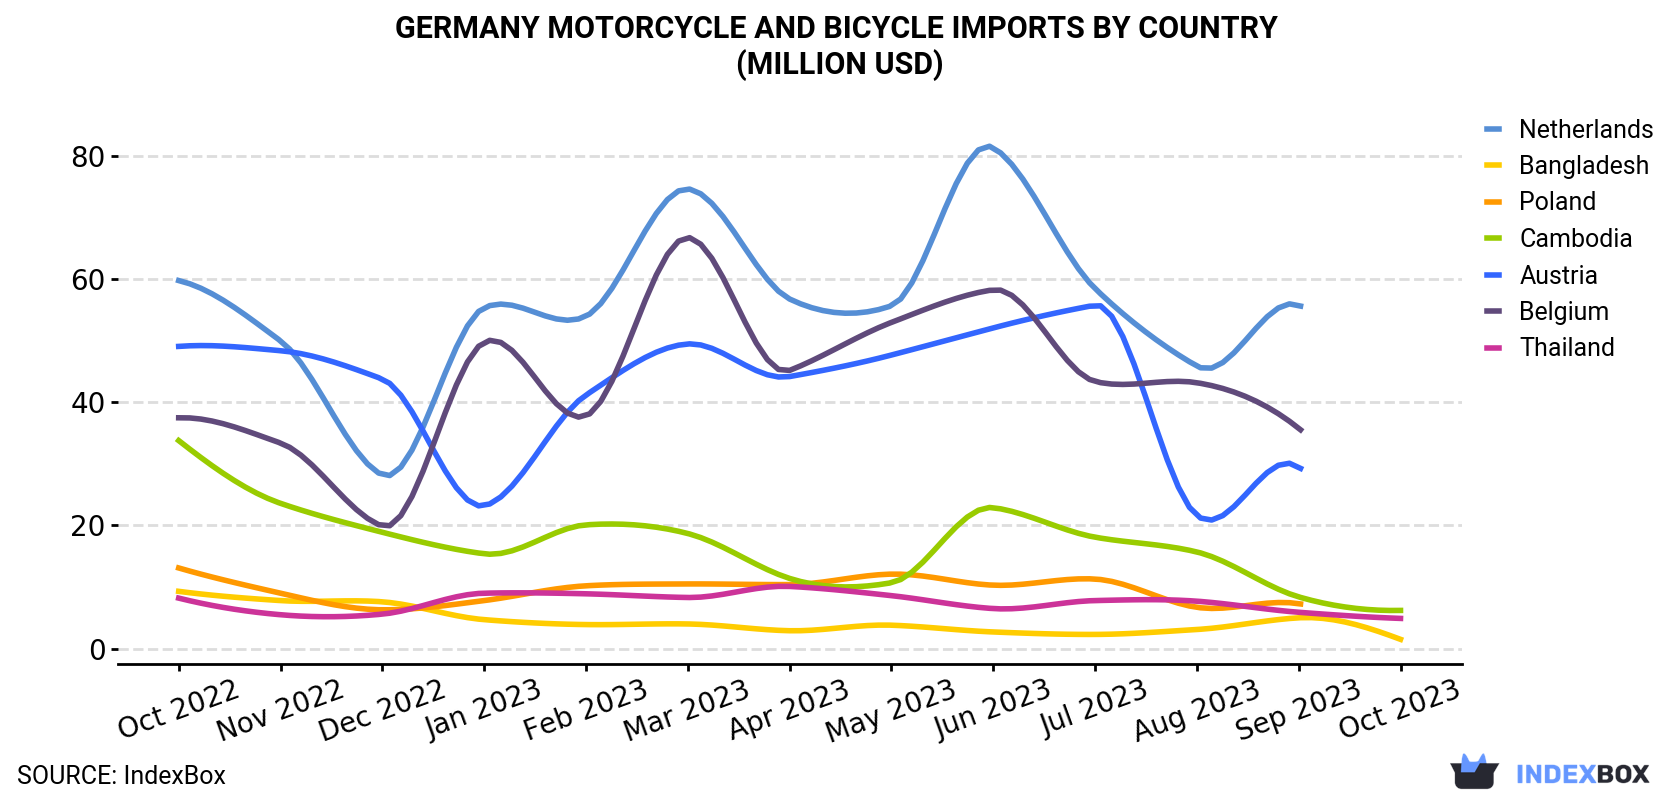 Germany Motorcycle And Bicycle Imports By Country (Million USD)